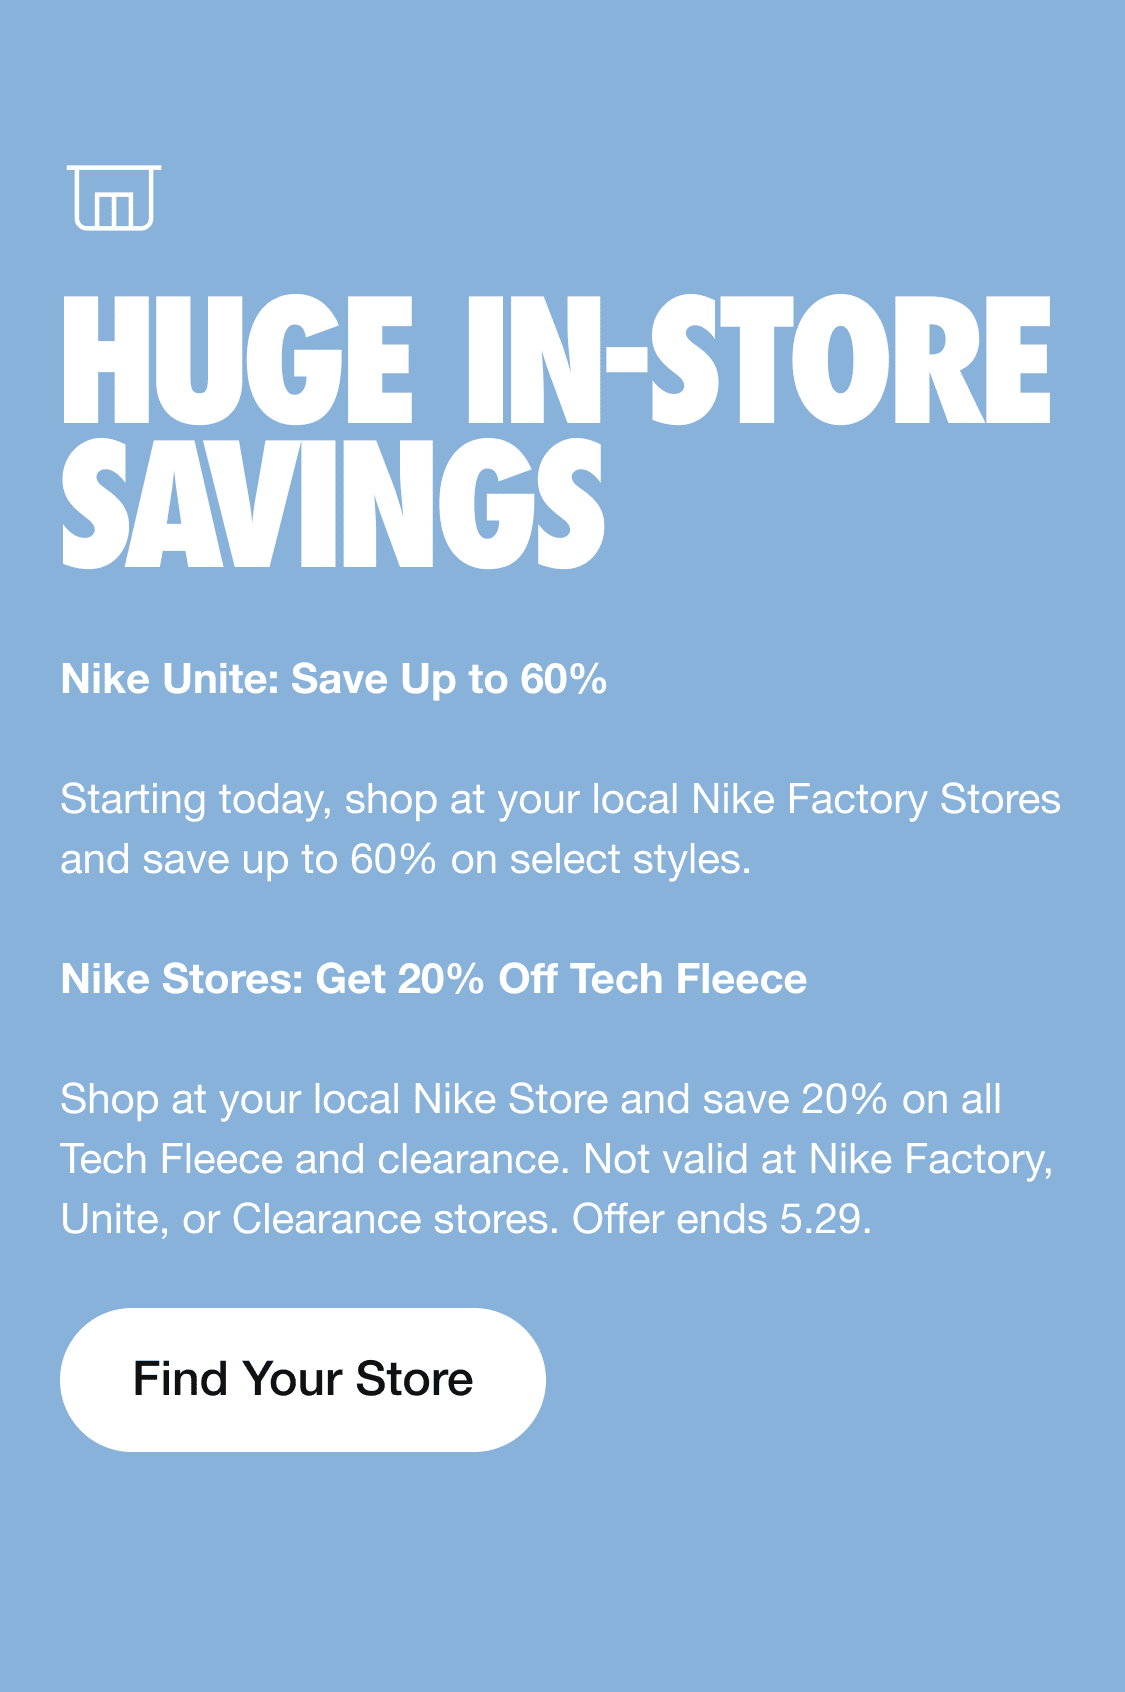 i LRI i e Nike Unite: Save Up to 60% Starting today, shop at your local Nike Factory Stores and save up to 60% on select styles. Nike Stores: Get 20% Off Tech Fleece Shop at your local Nike Store and save 20% on all Tech Fleece and clearance. Not valid at Nike Factory, Unite, or Clearance stores. Offer ends 5.29. Find Your Store 